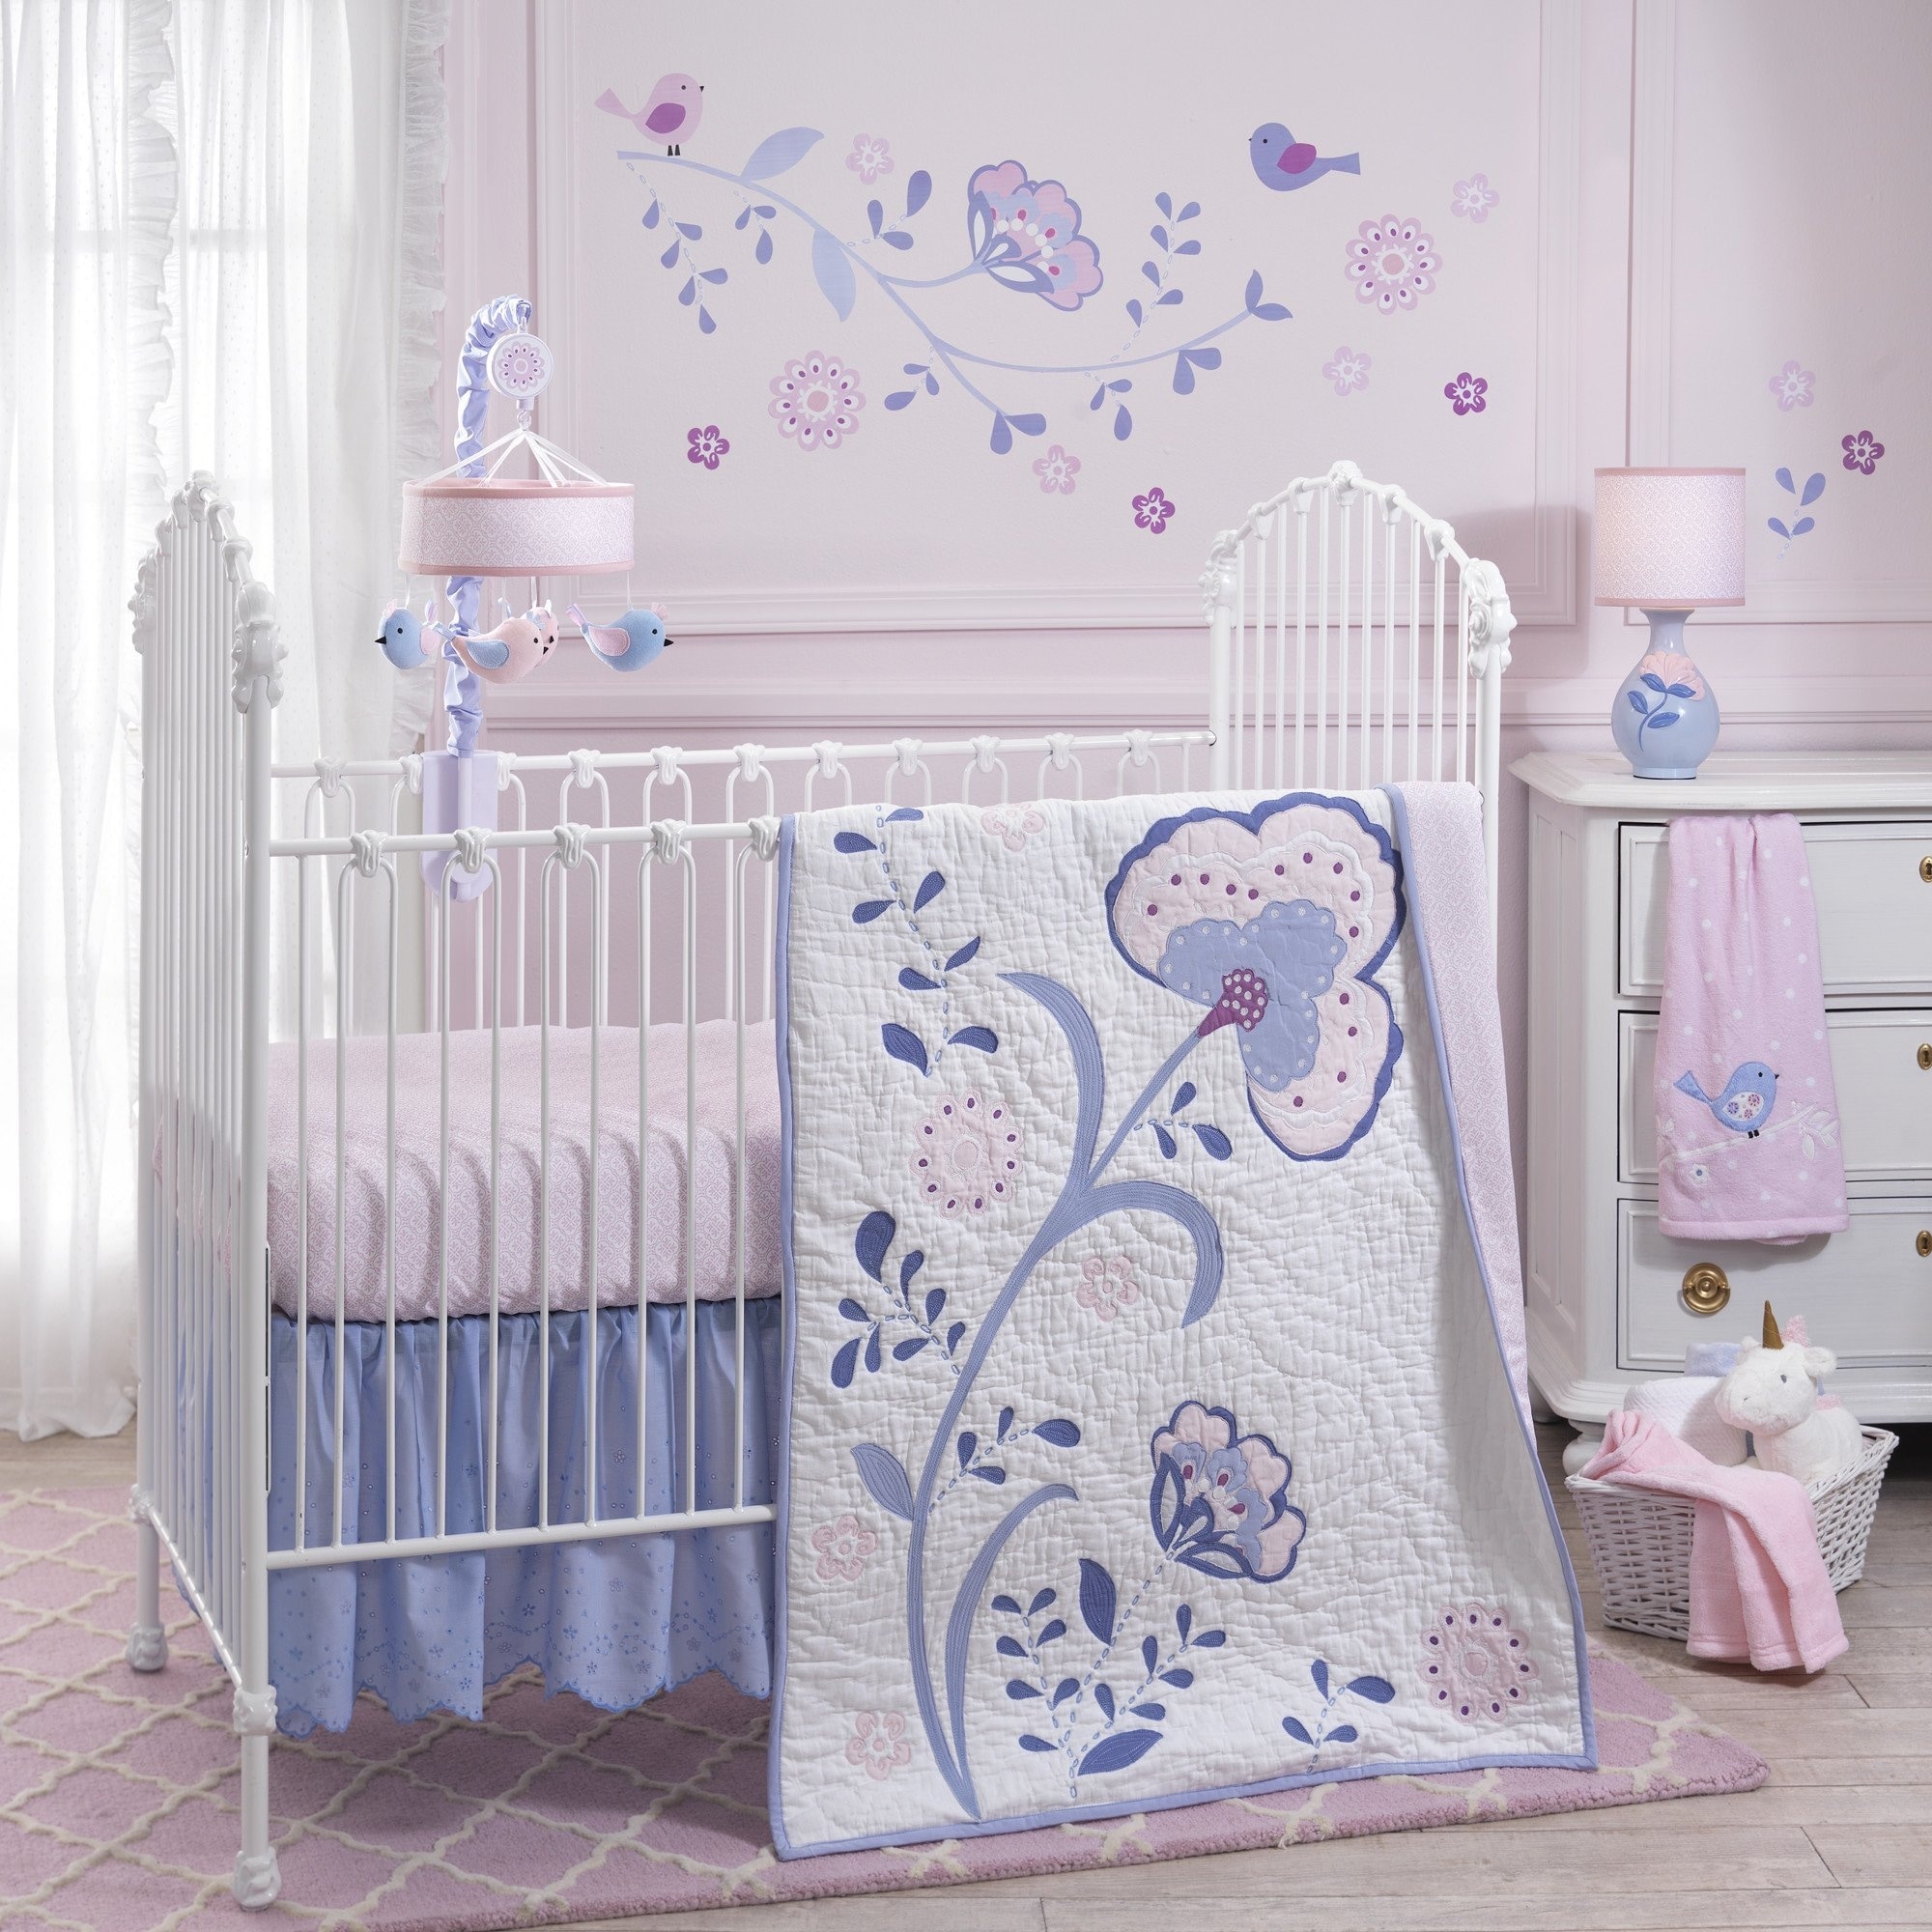 purple and gray baby bedding